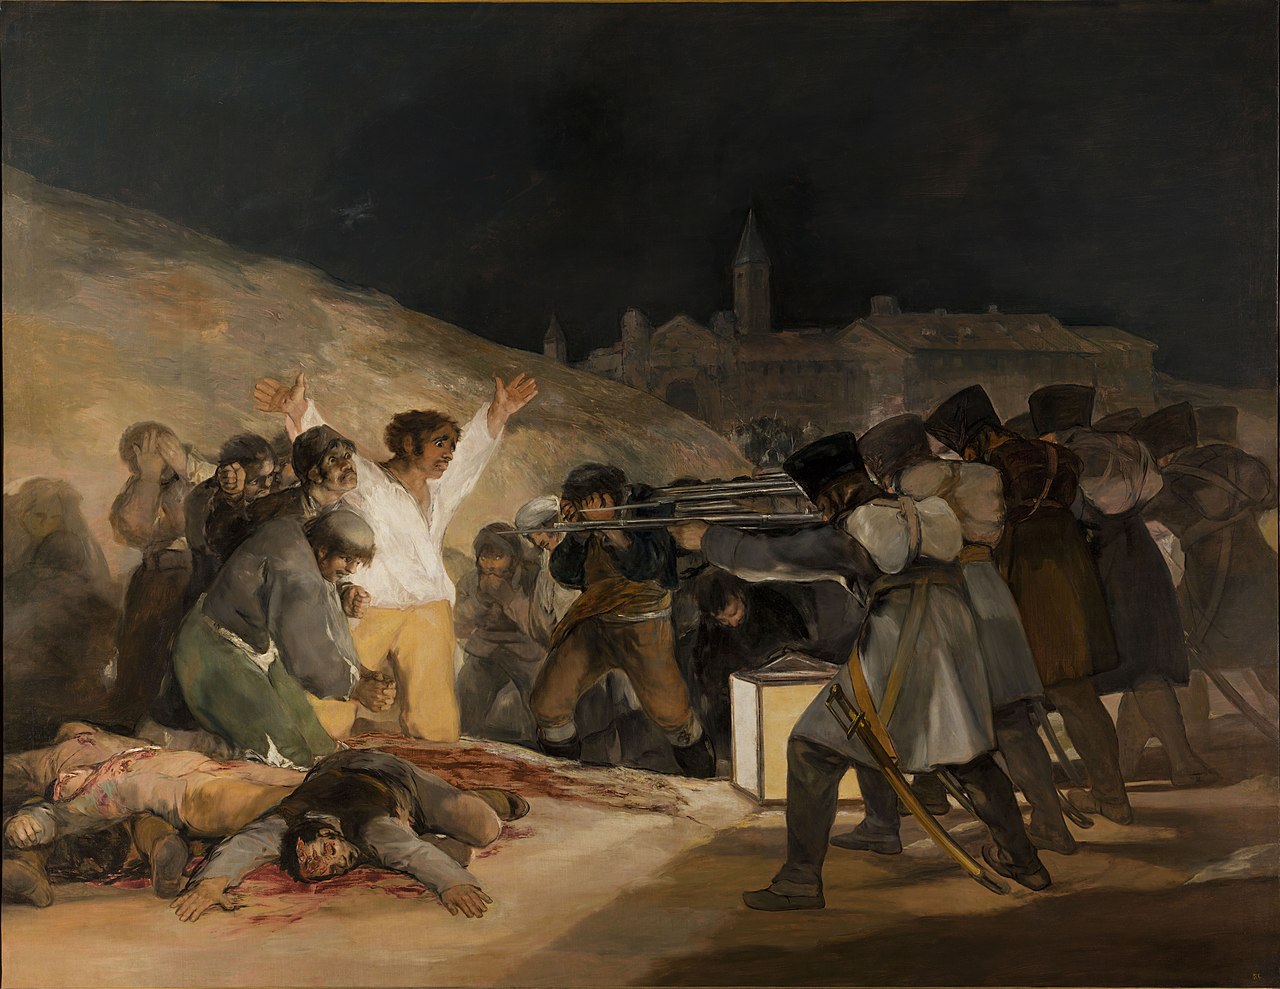 The Third of May 1808 in Madrid